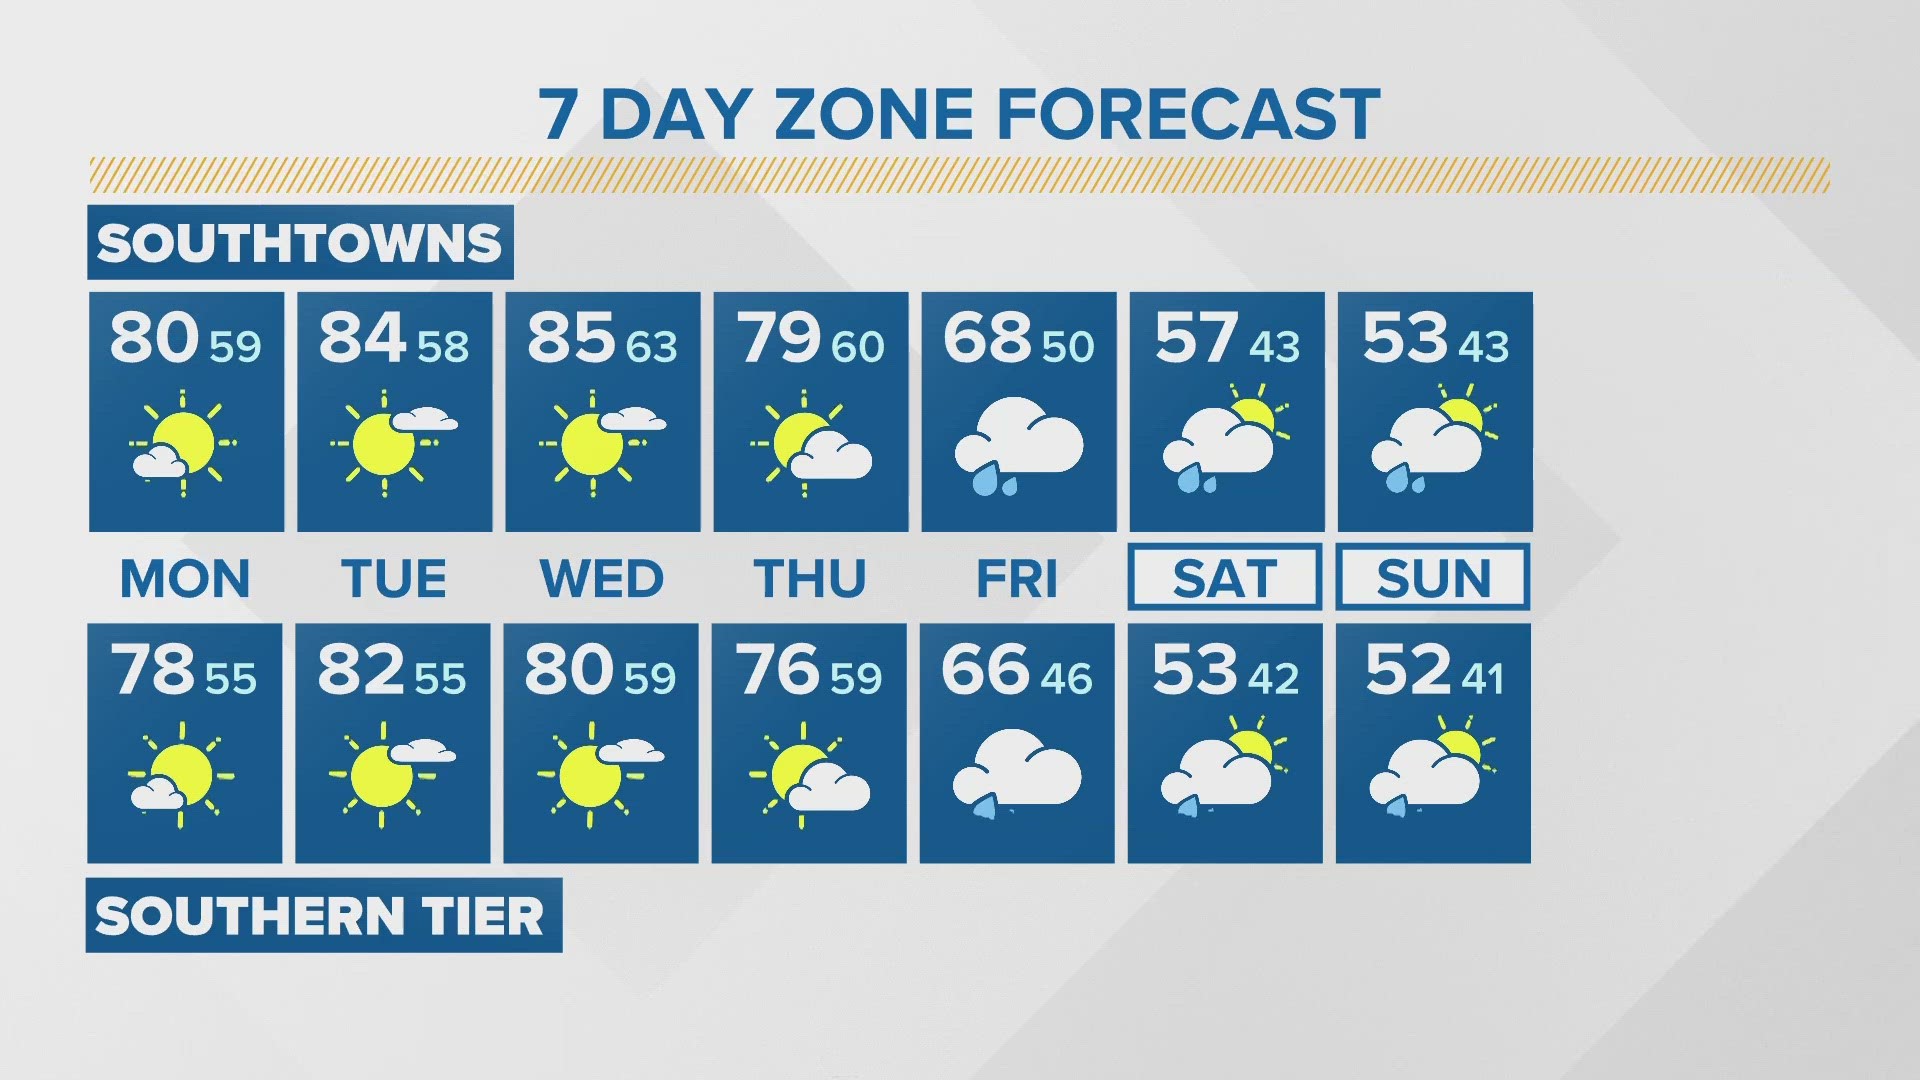 Patrick has a look at your seven-day zone forecast.